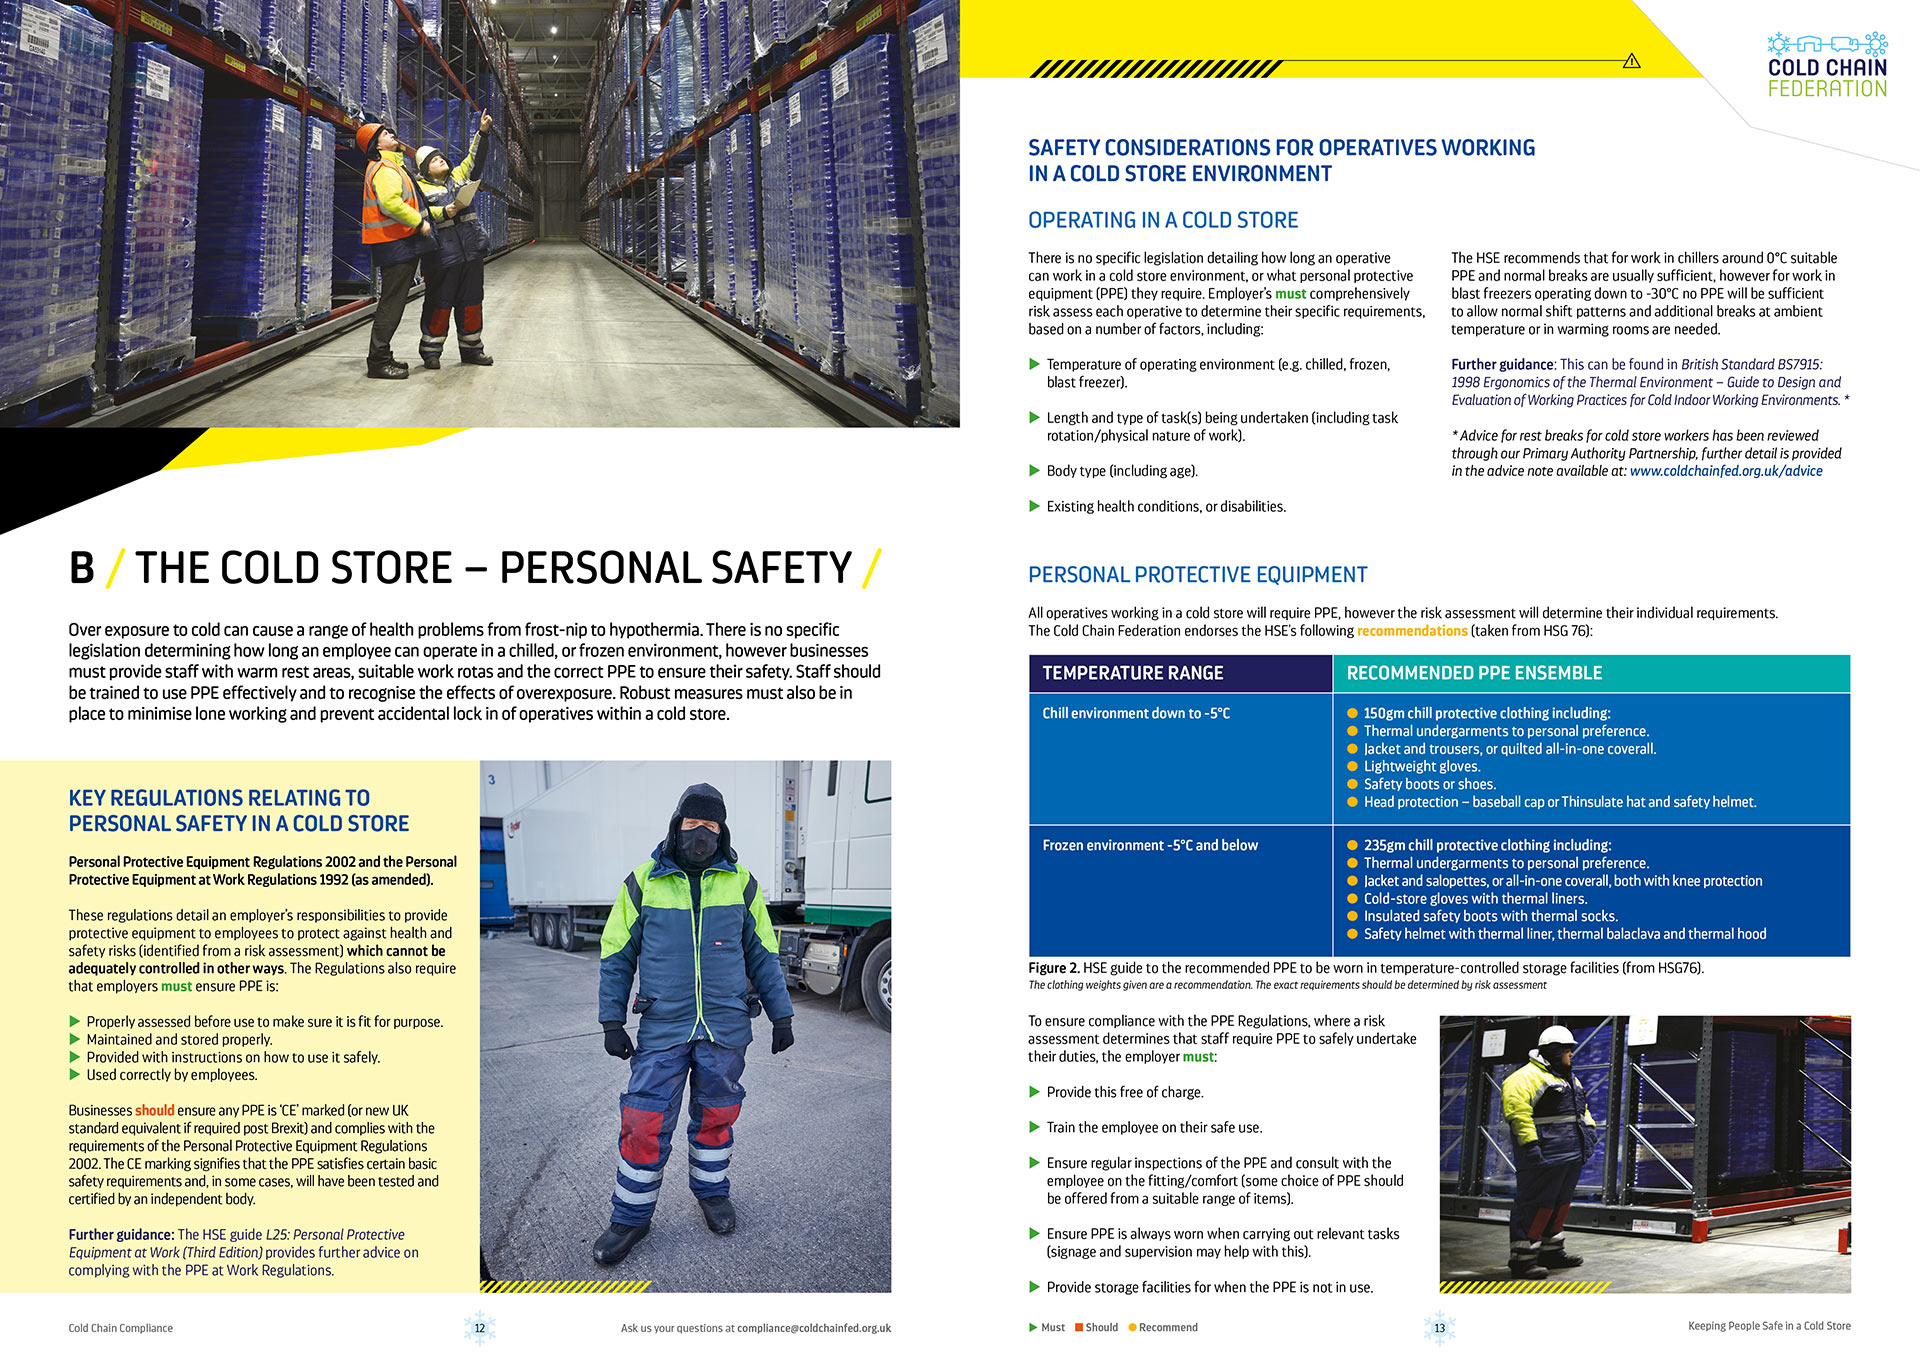 Health and safety guidance to keep people safe in a cold store environment